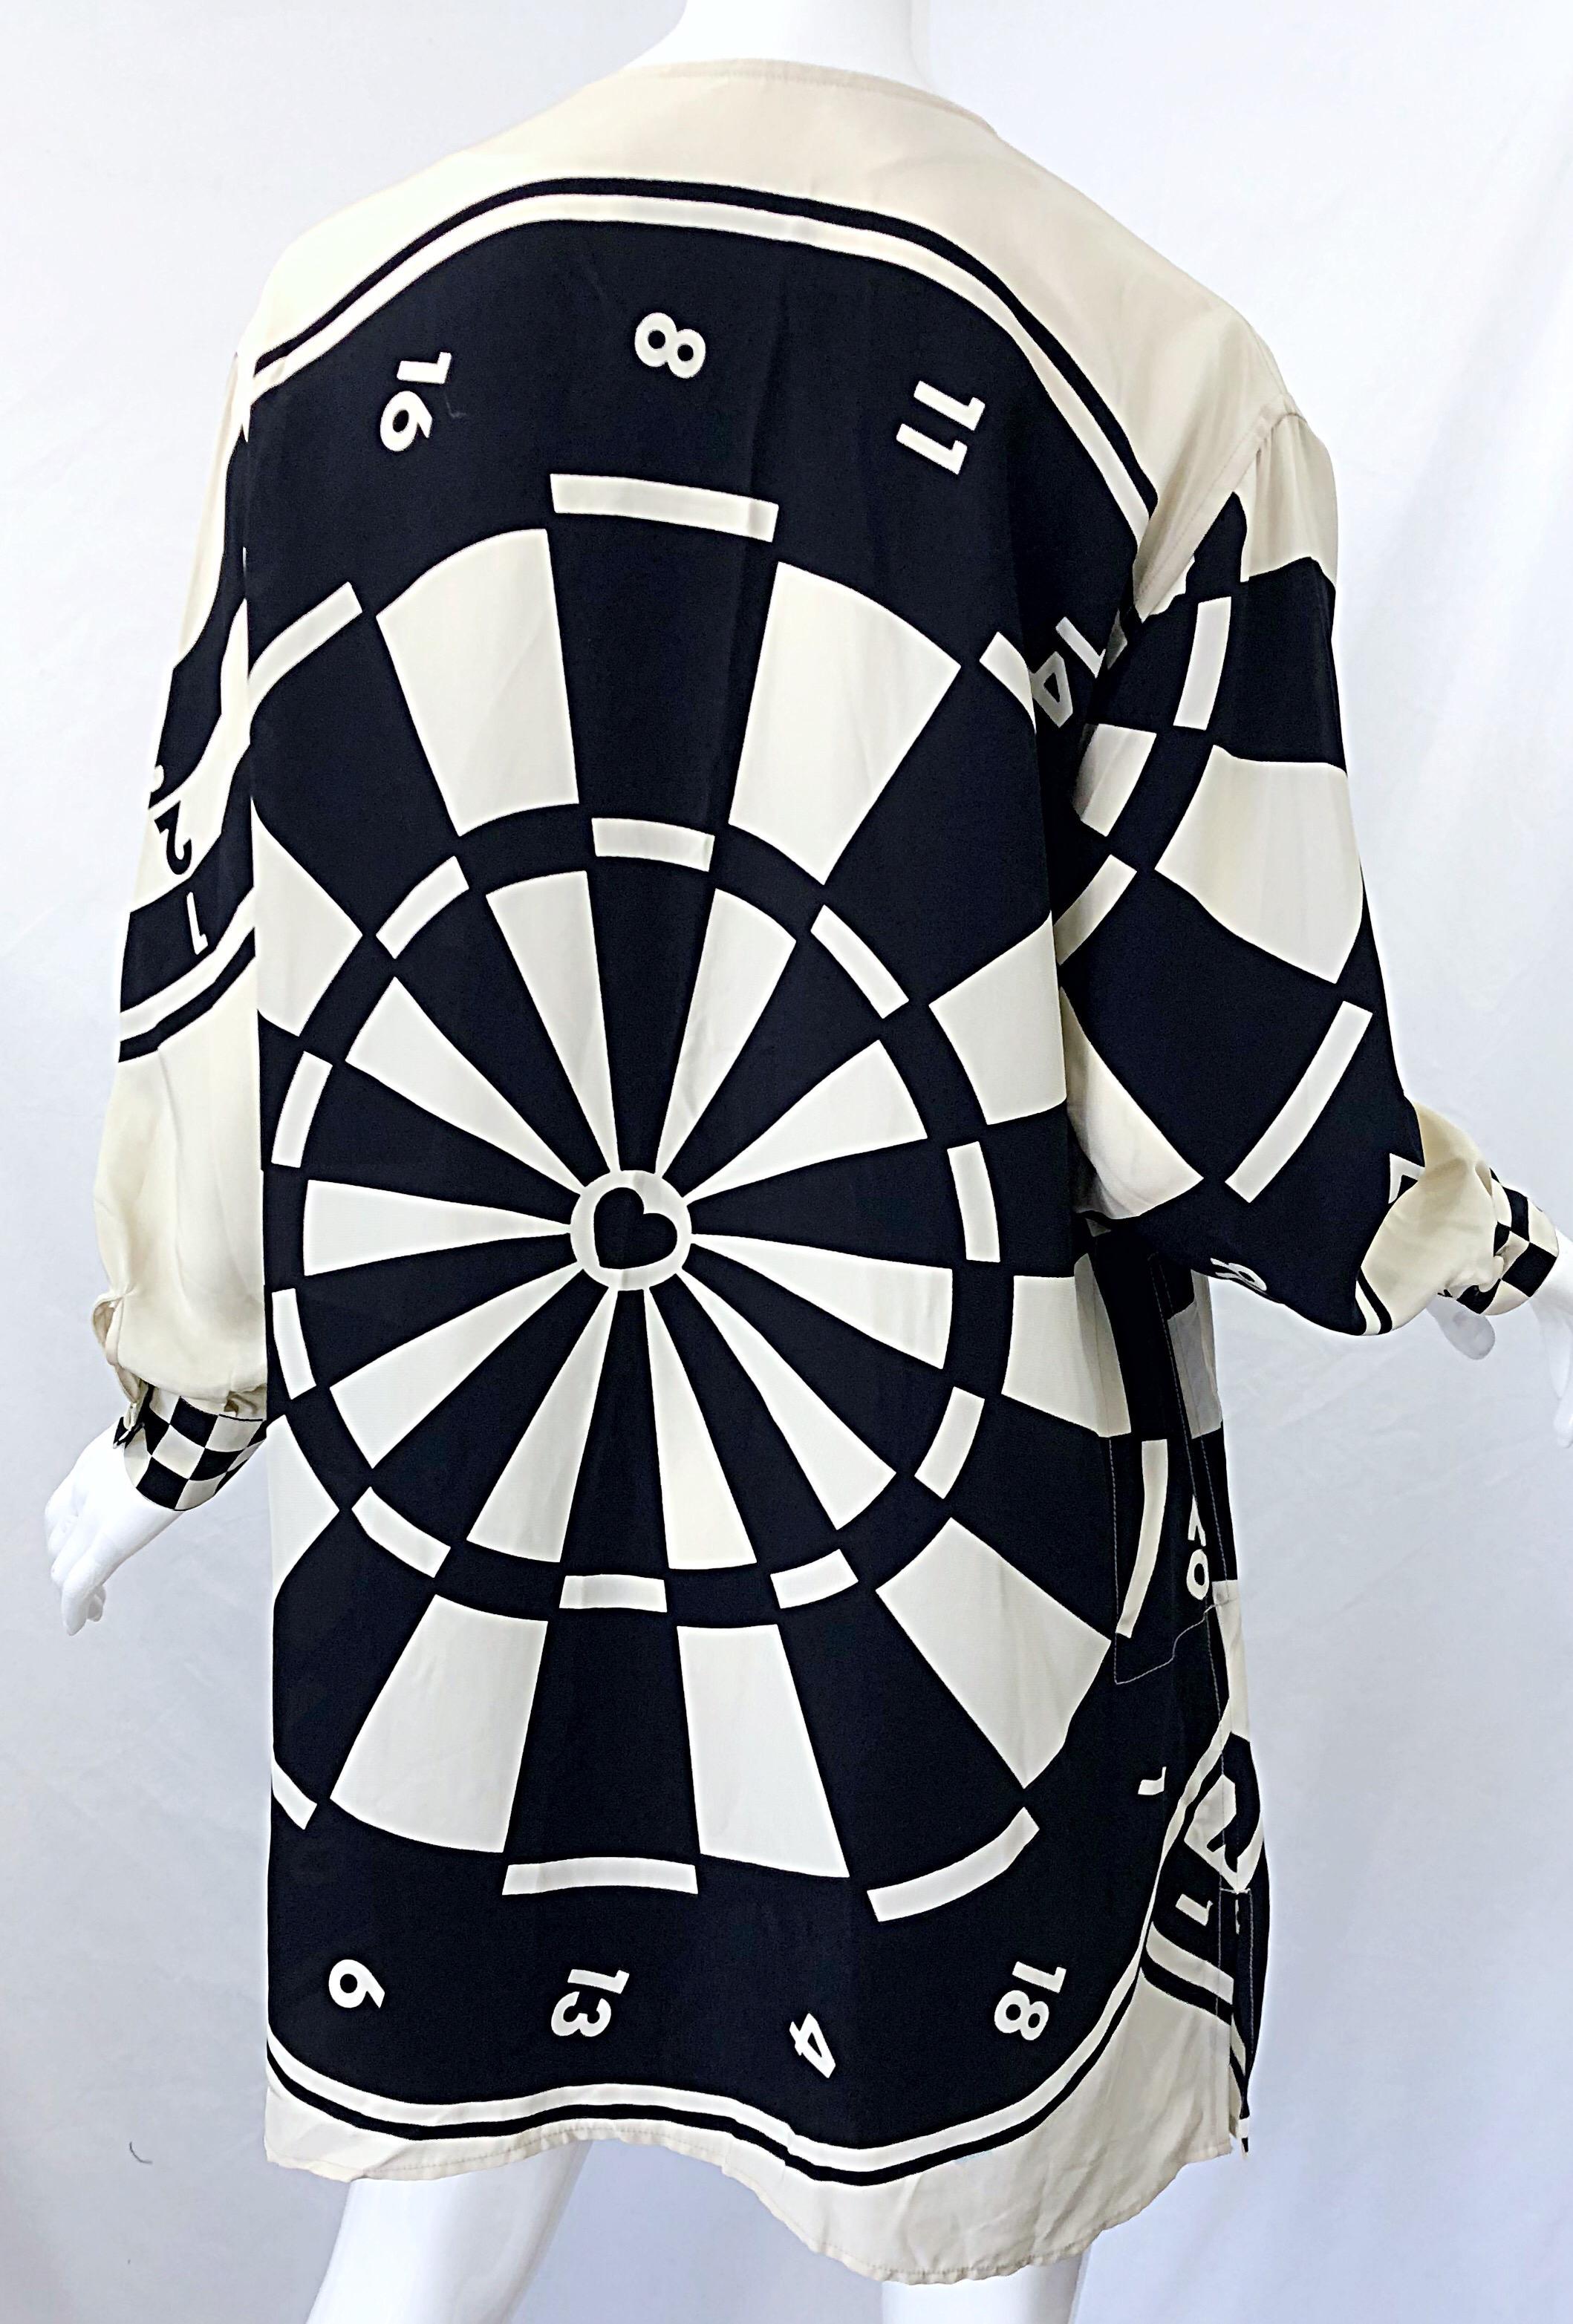 1980s Moschino Cheap & Chic Bullseye Black and White Size 8 Vintage Tunic Dress For Sale 8